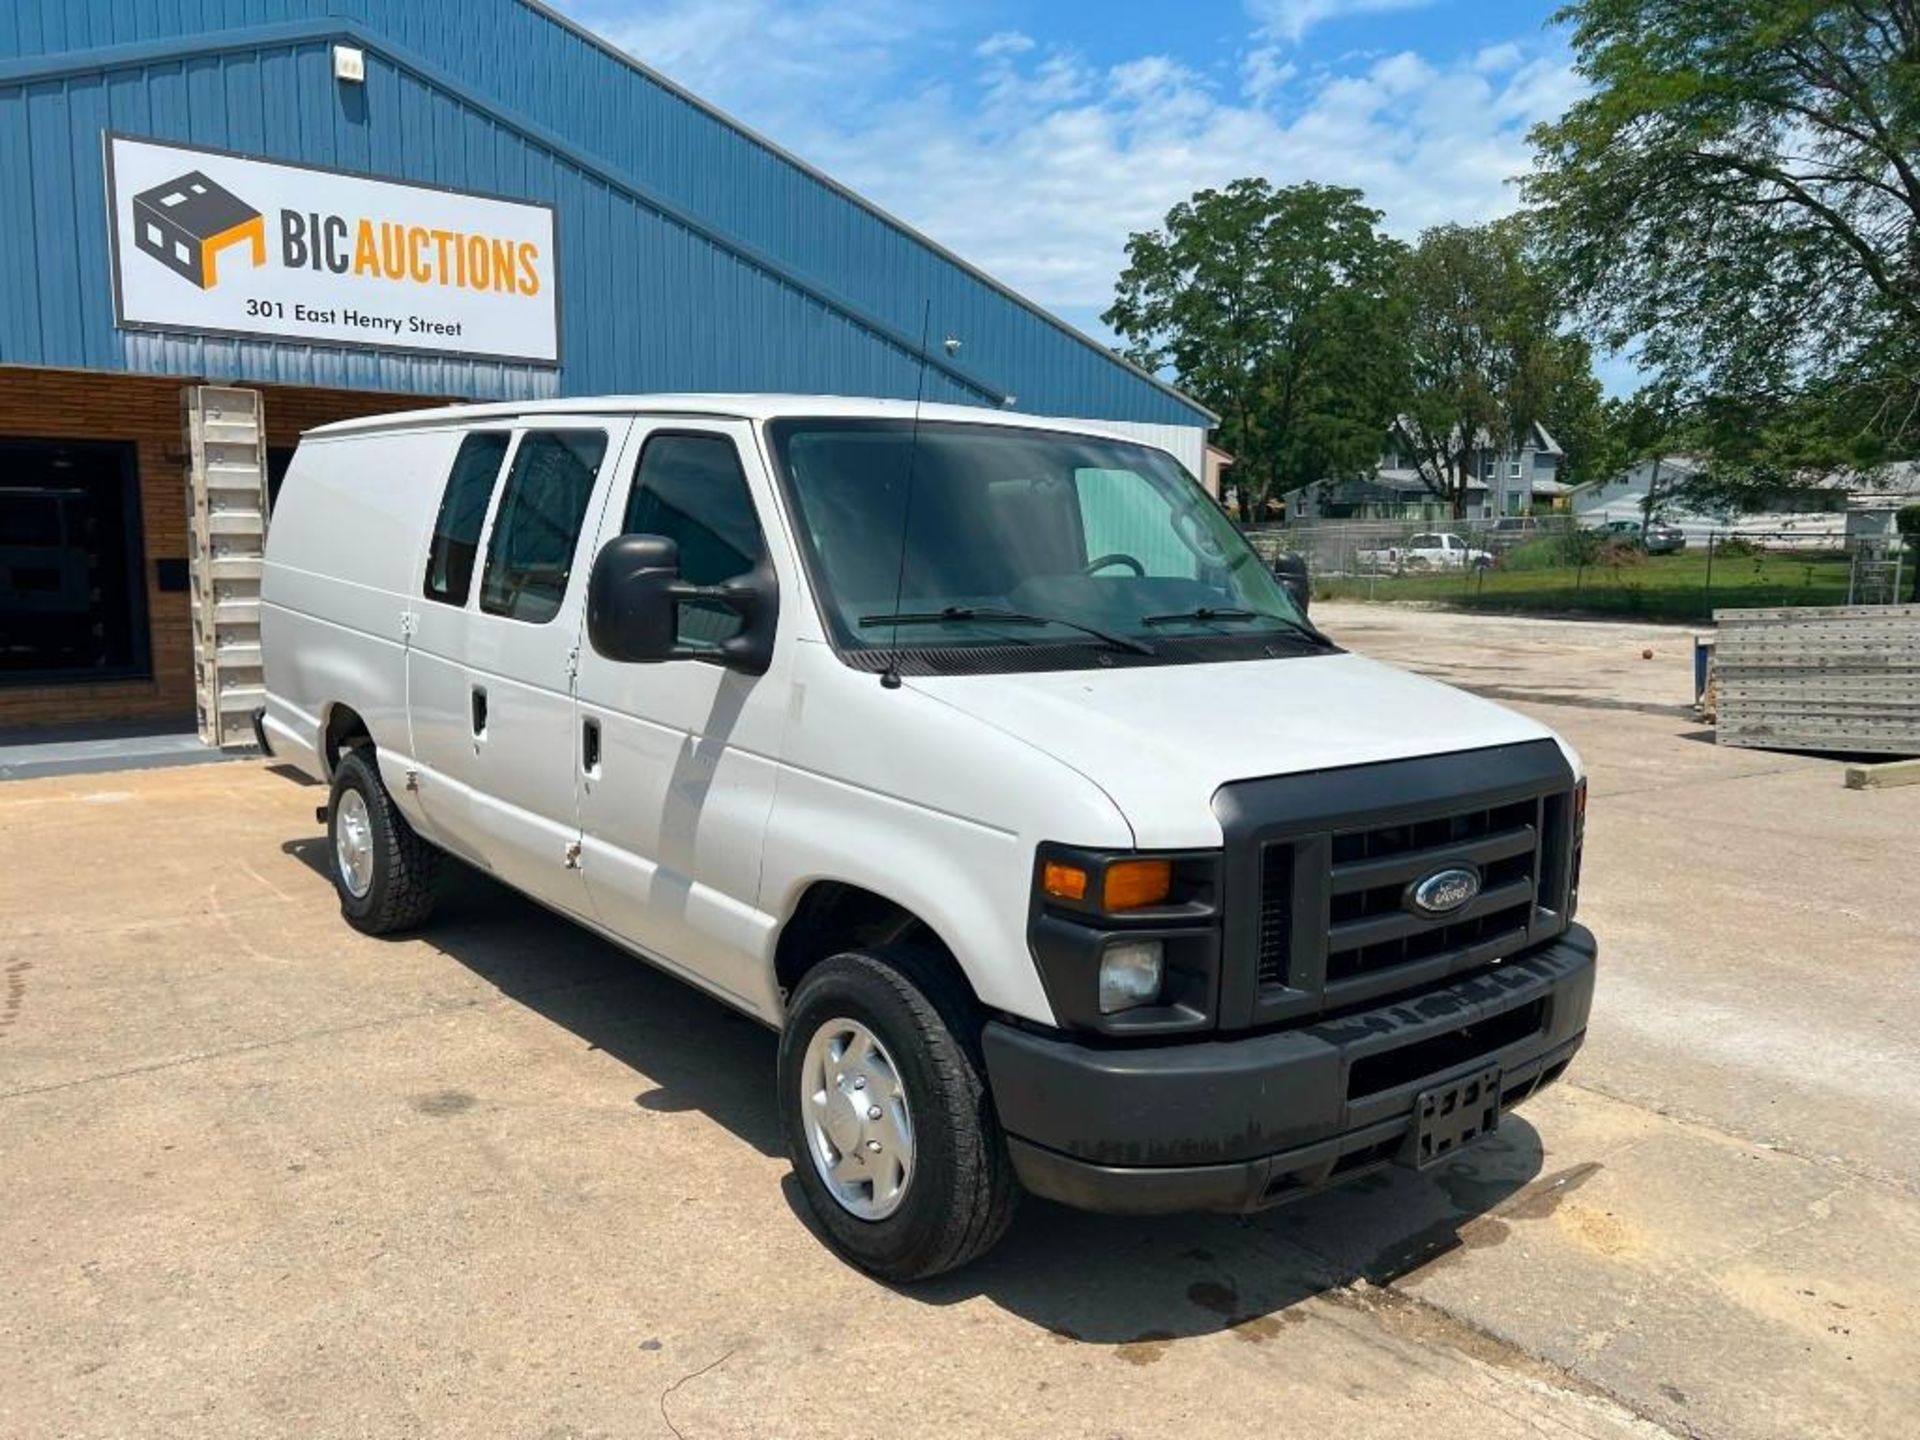 2012 Ford E250 cargo van, automatic transmission, miles: 226K, VIN: 1FTNS2EL9CDA87781, located in - Image 2 of 27